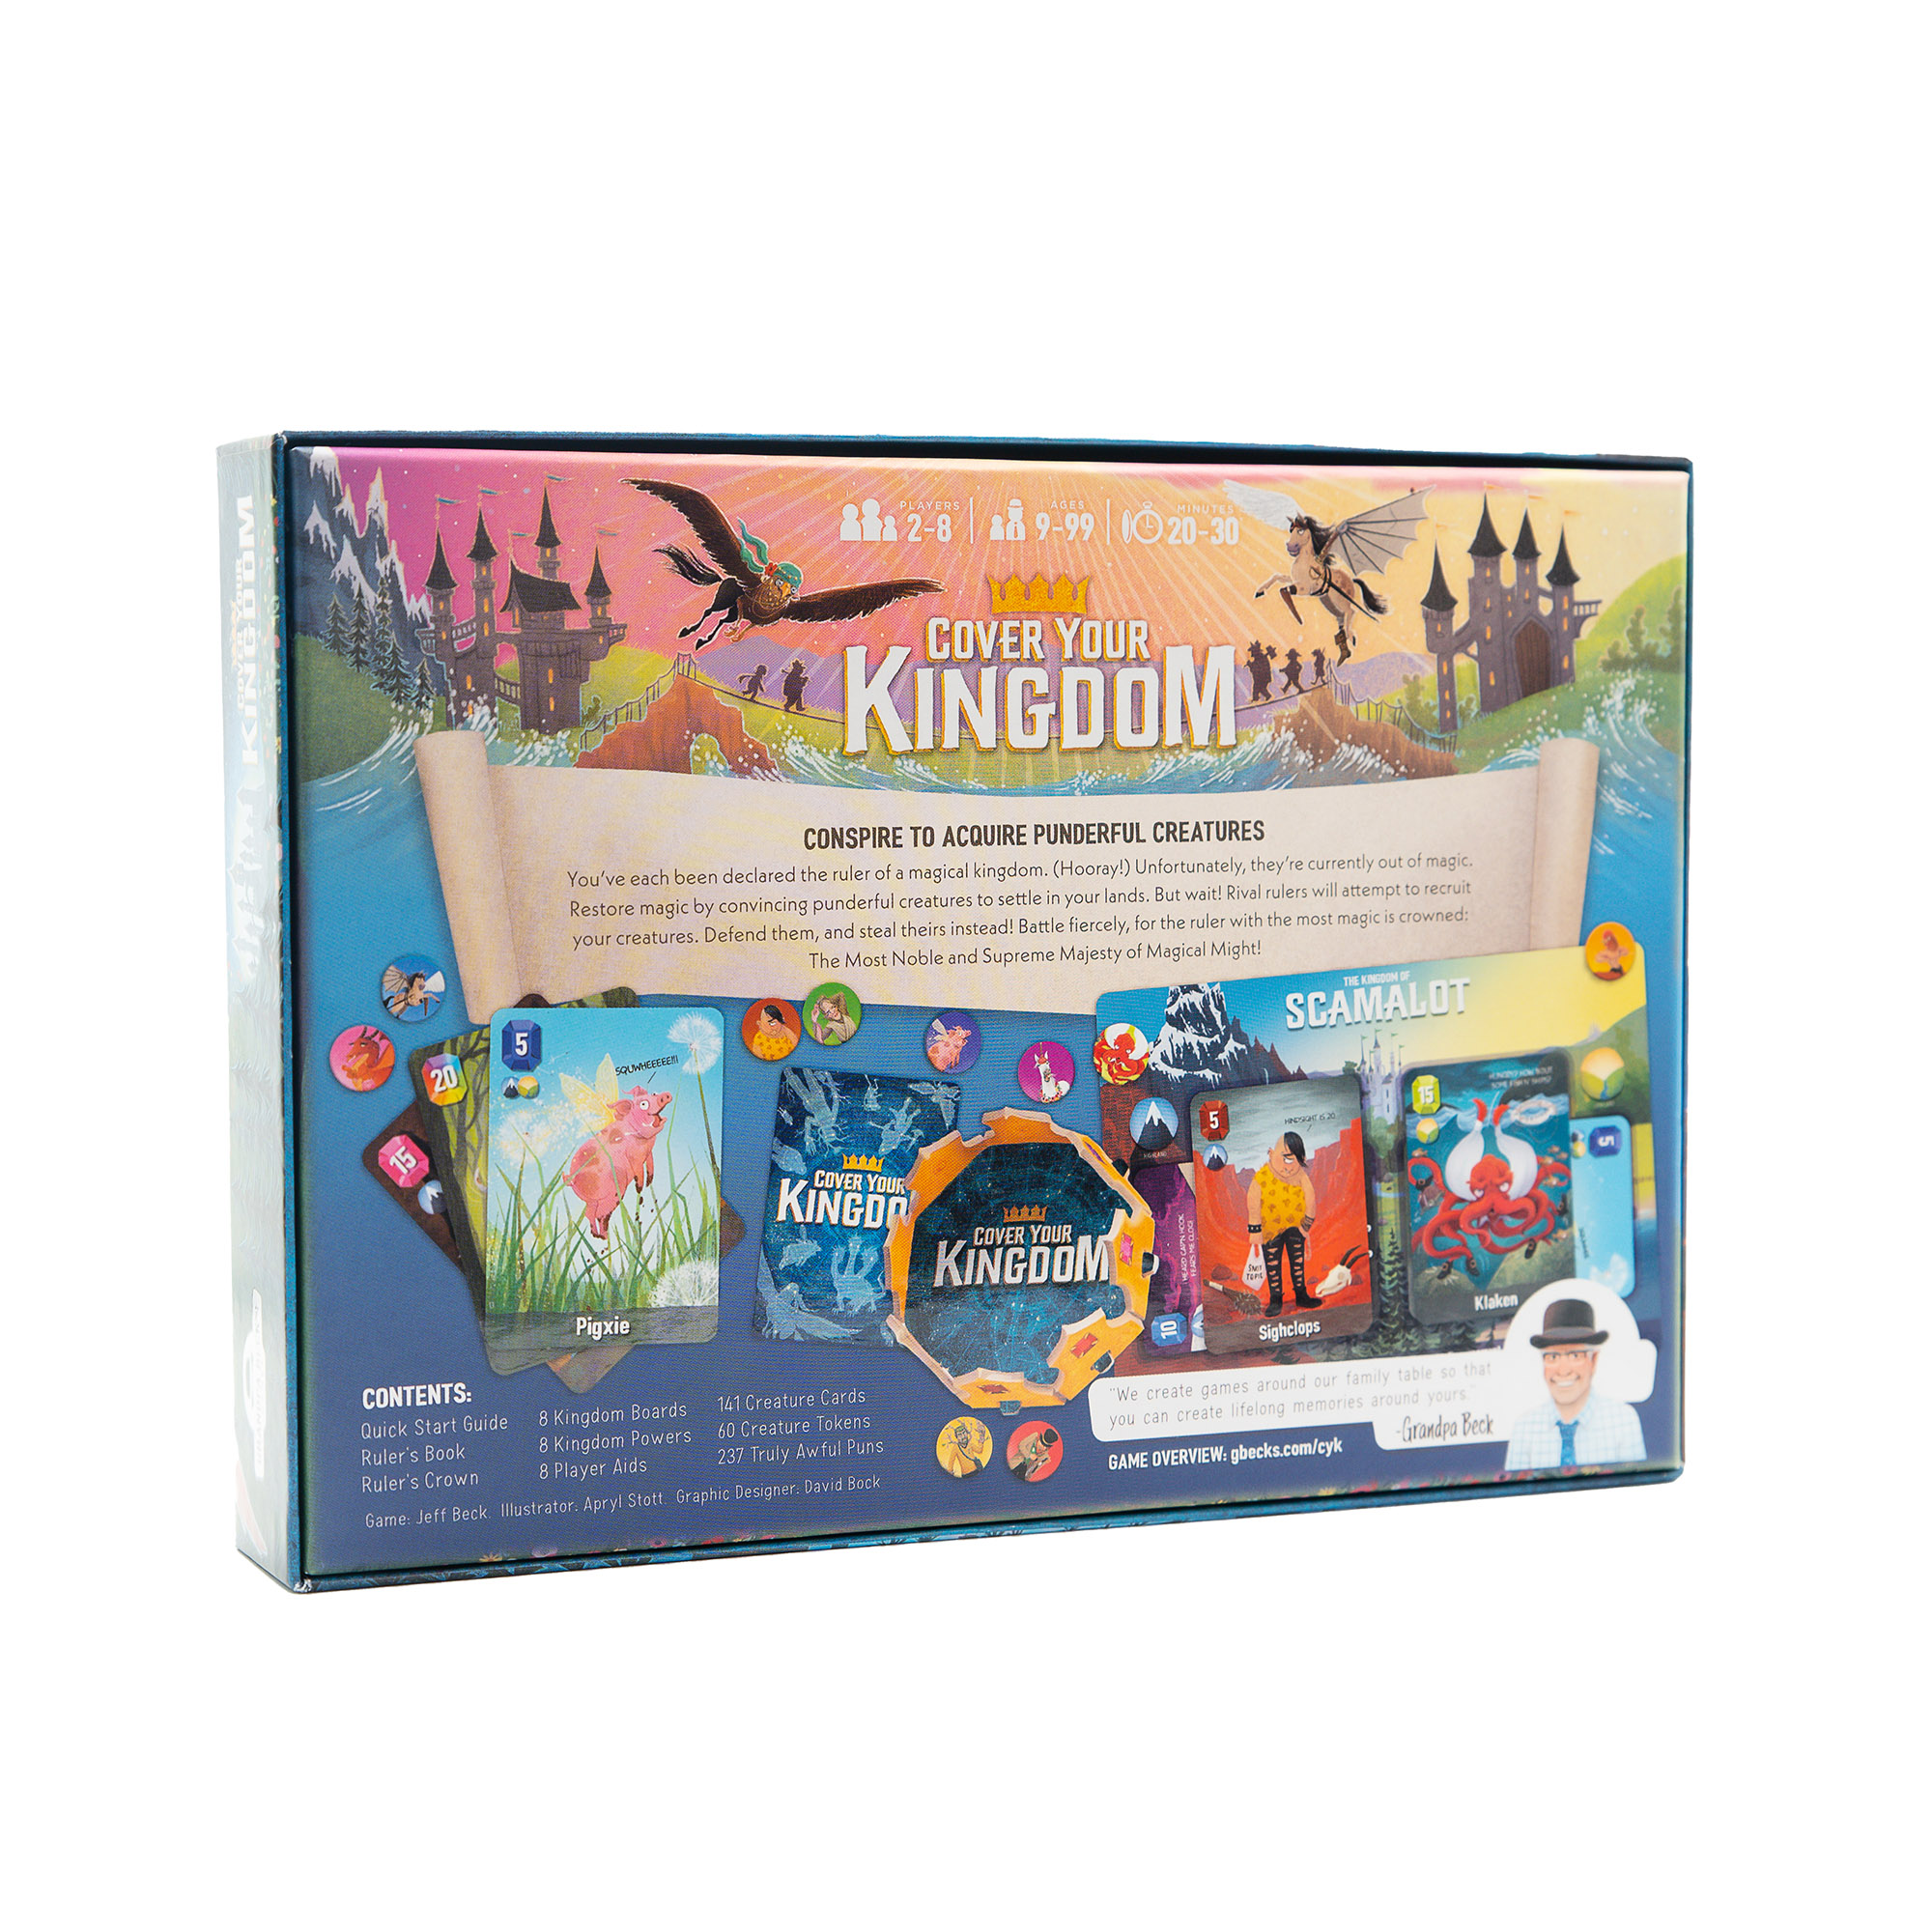 Cover Your Kingdom Board Game, by Grandpa Beck's Games - image 3 of 8